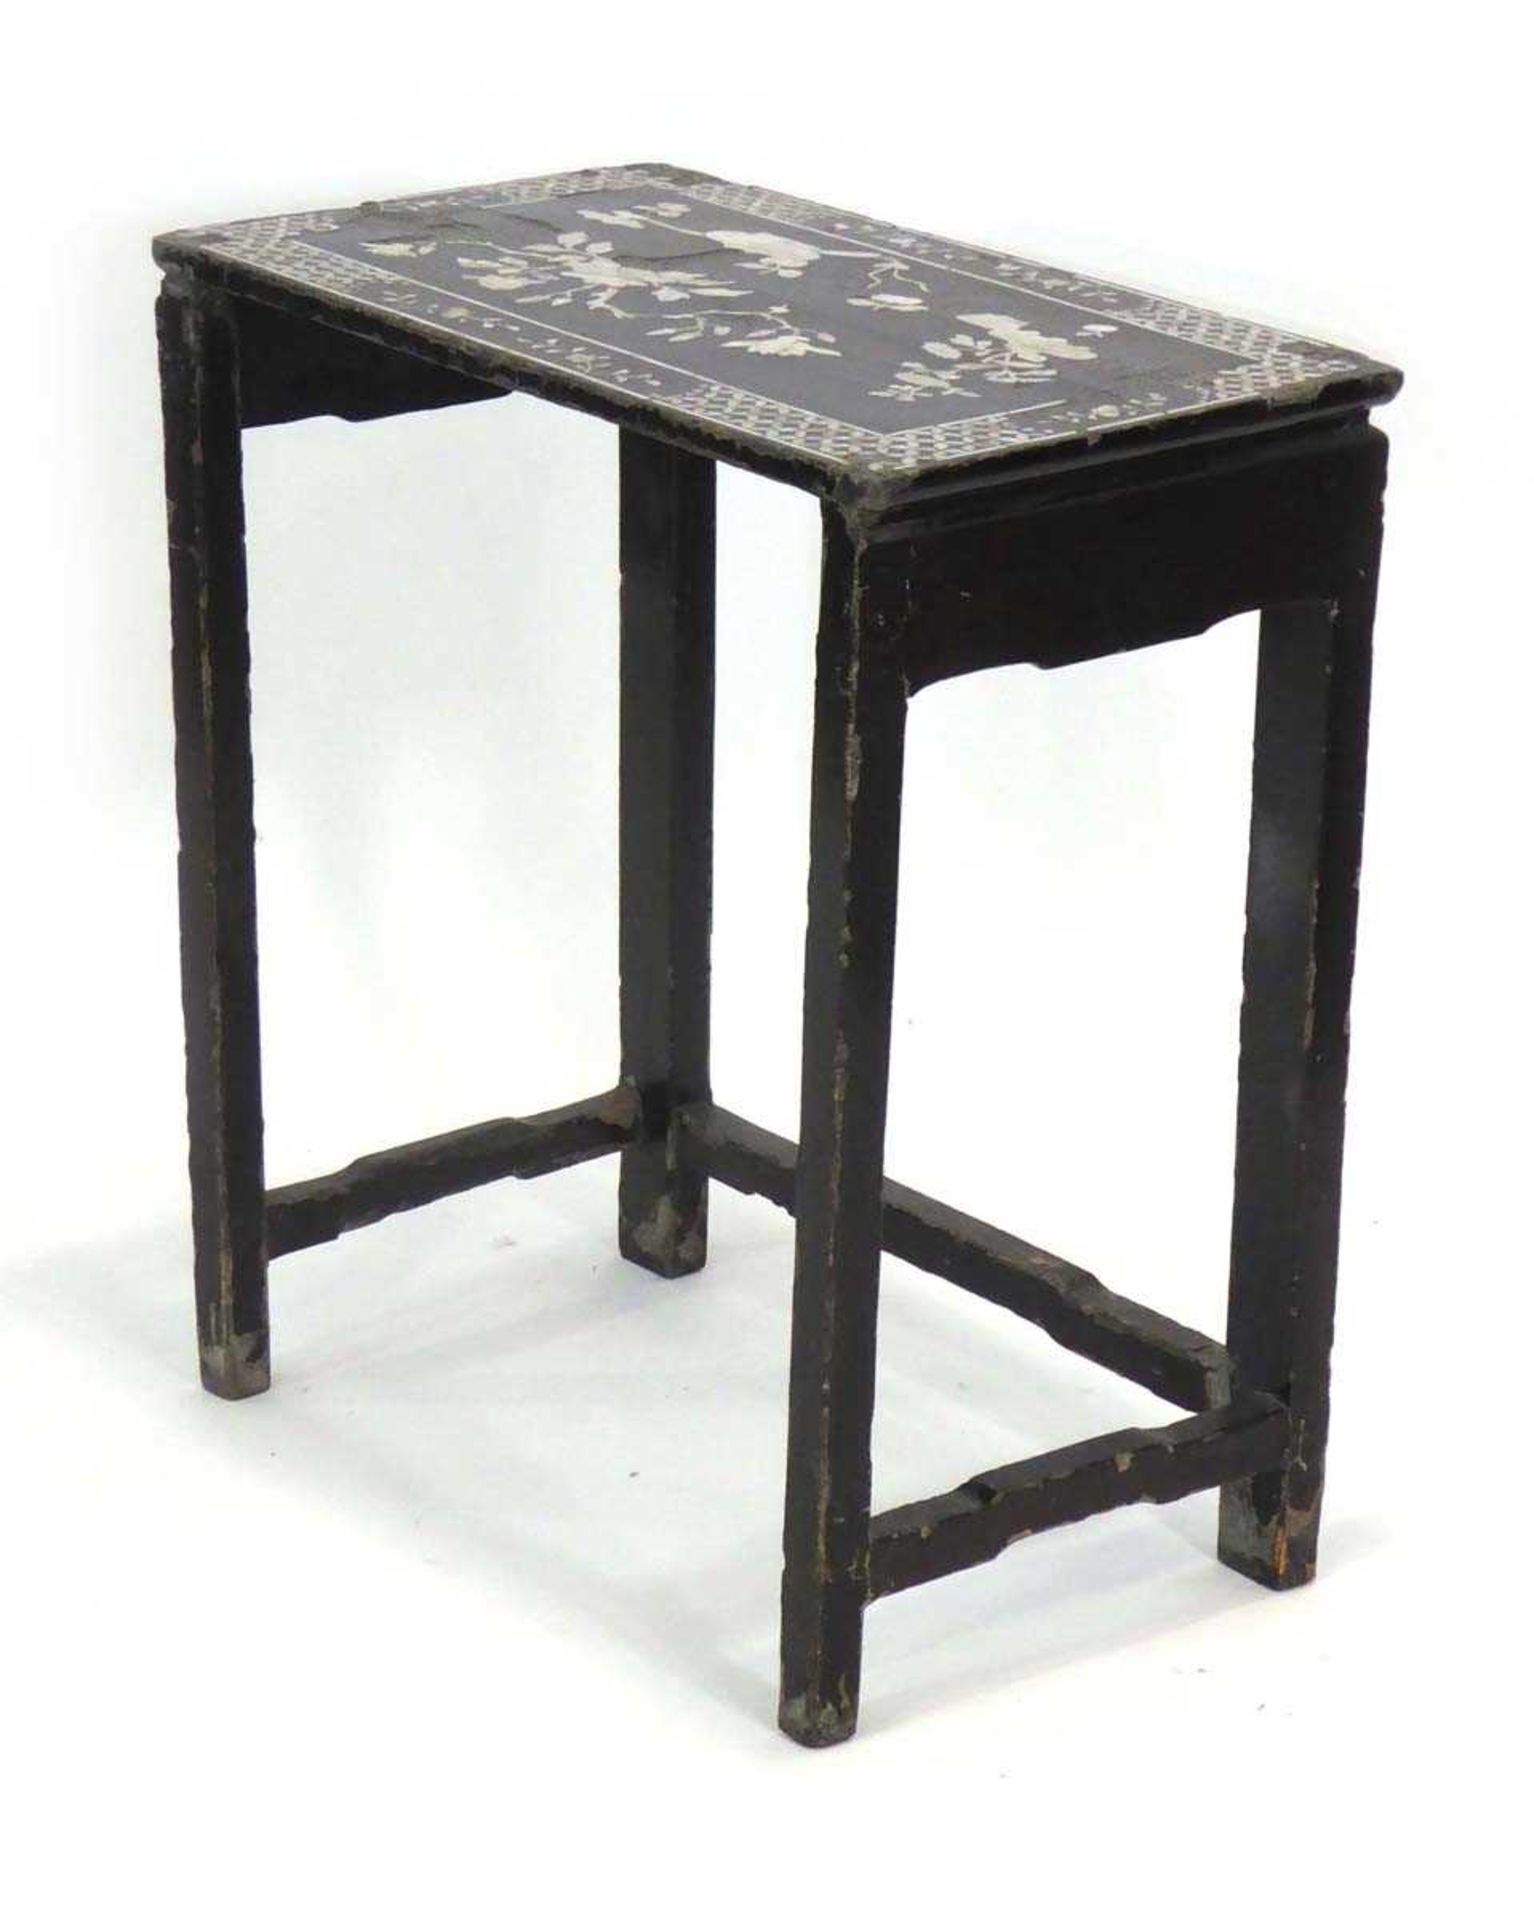 A 19th century Chinese Export (?)huanghuali and lacquered nesting table inlaid with mother-of-